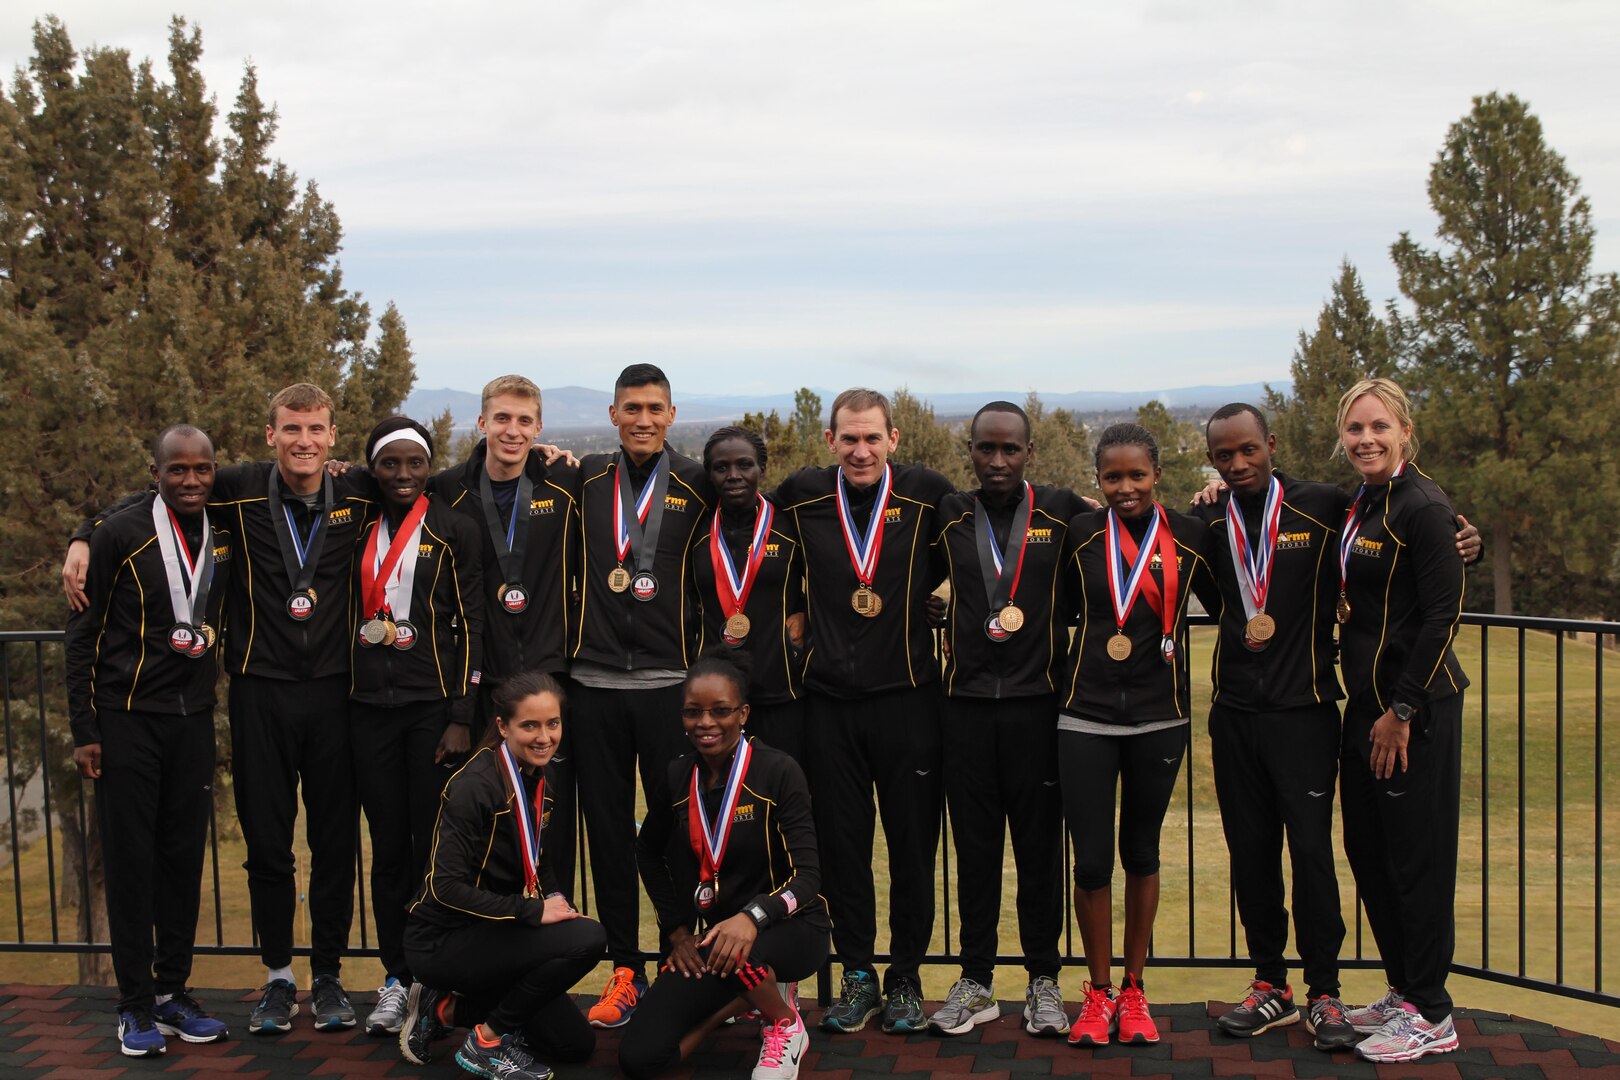 All-Army team photo.  The 2016 Armed Forces Cross Country Championship was held in conjunction with the USA Track and Field National Championship in Bend, Ore.  Army Men and Women teams swept the team competitions.  Army Men captured their third straight title with the Women repeating their 2015 performance.  Photo by Tom Higgins, Army Sports